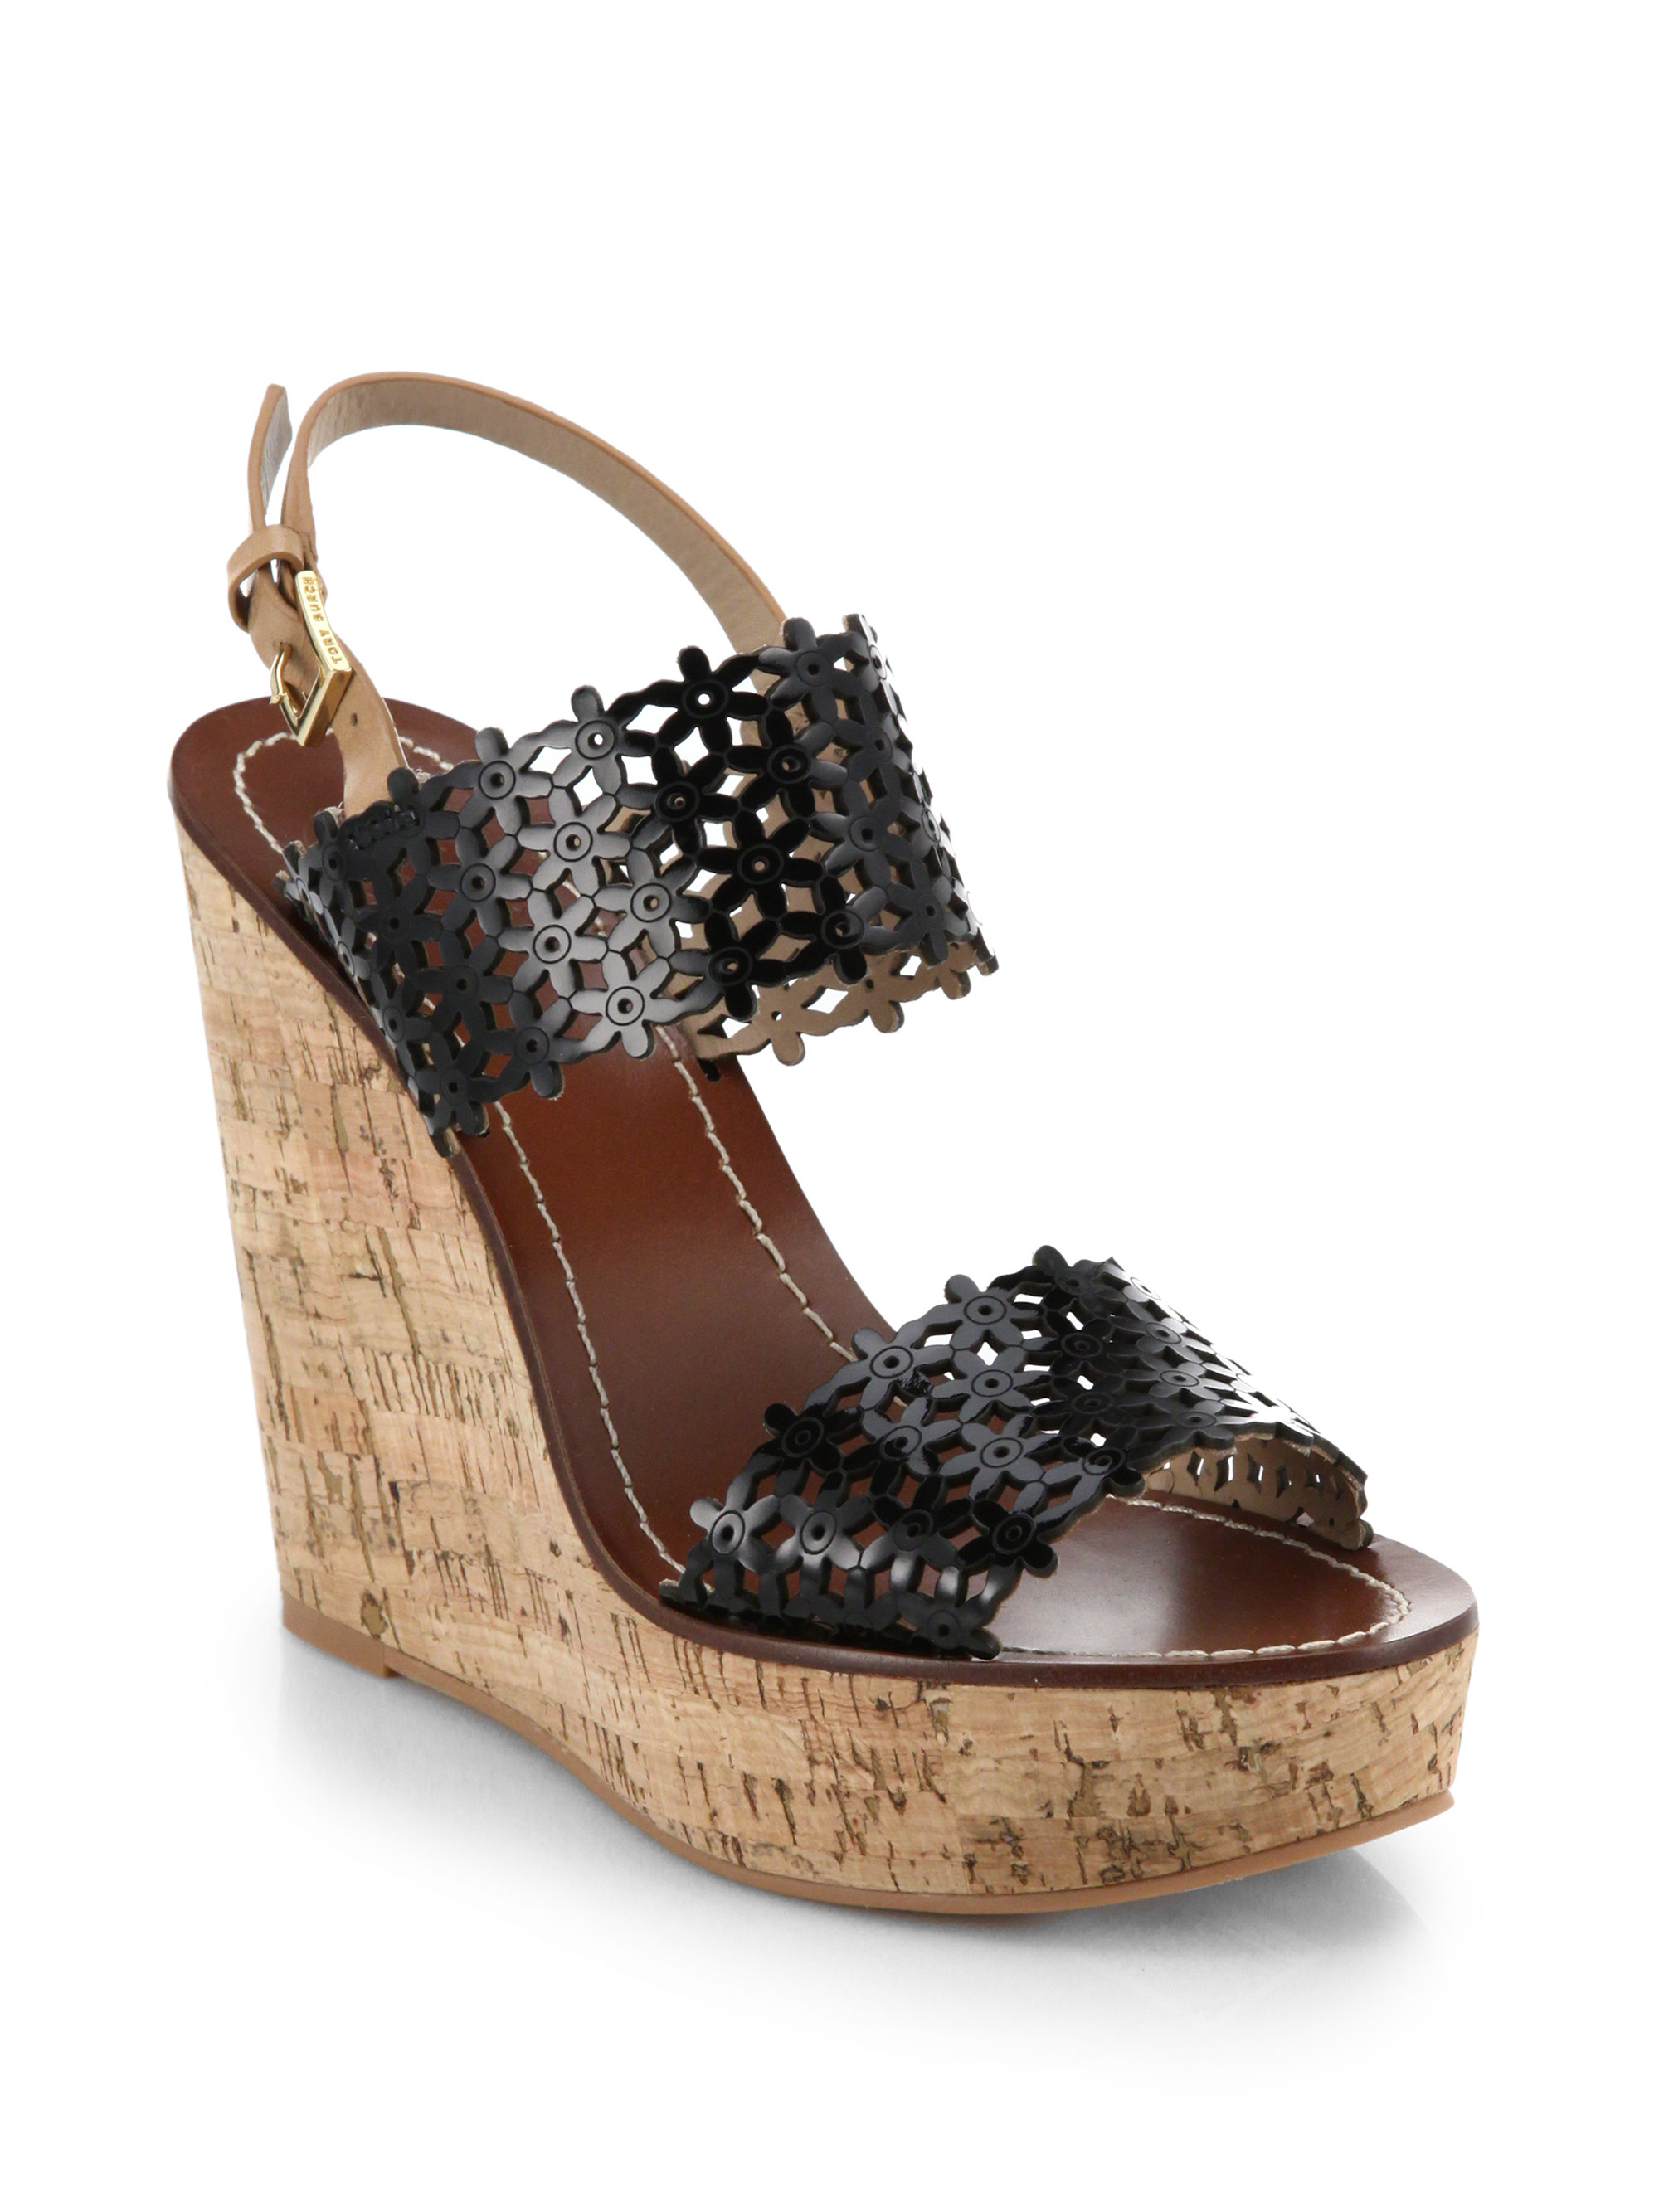 Tory burch Daisy Cutout Leather Wedge Sandals in Black | Lyst